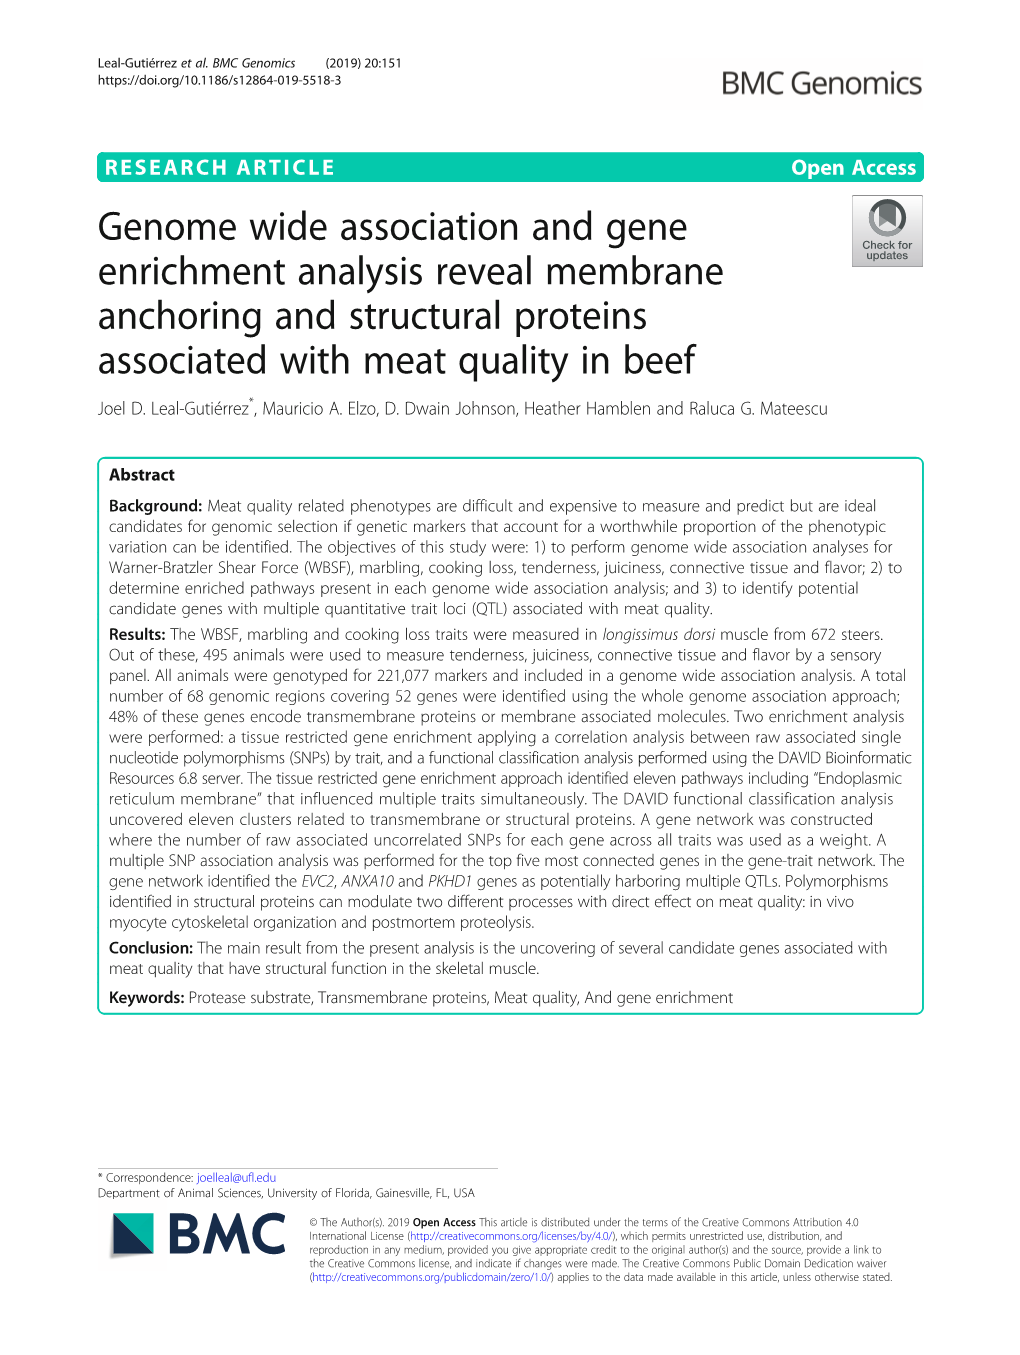 Genome Wide Association and Gene Enrichment Analysis Reveal Membrane Anchoring and Structural Proteins Associated with Meat Quality in Beef Joel D